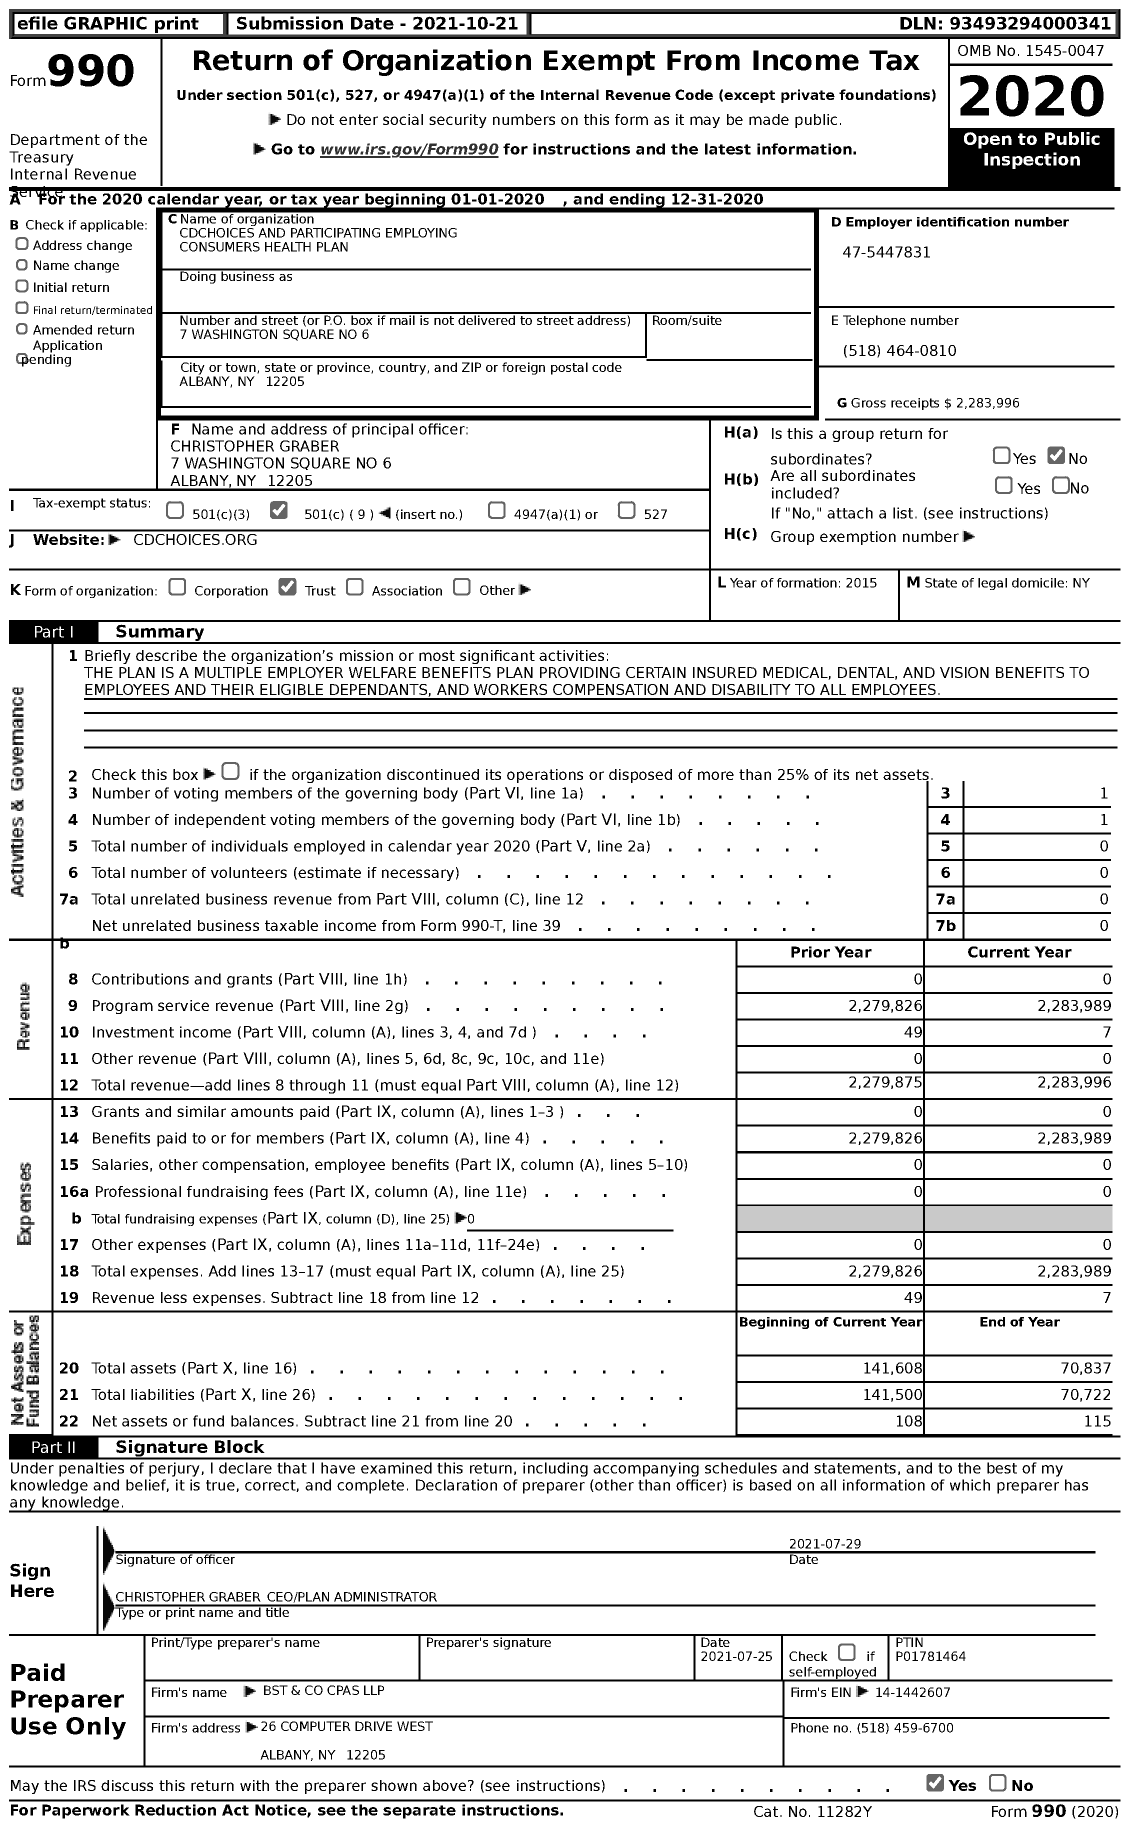 Image of first page of 2020 Form 990 for Cdchoices and Participating Employing Consumers Health Plan